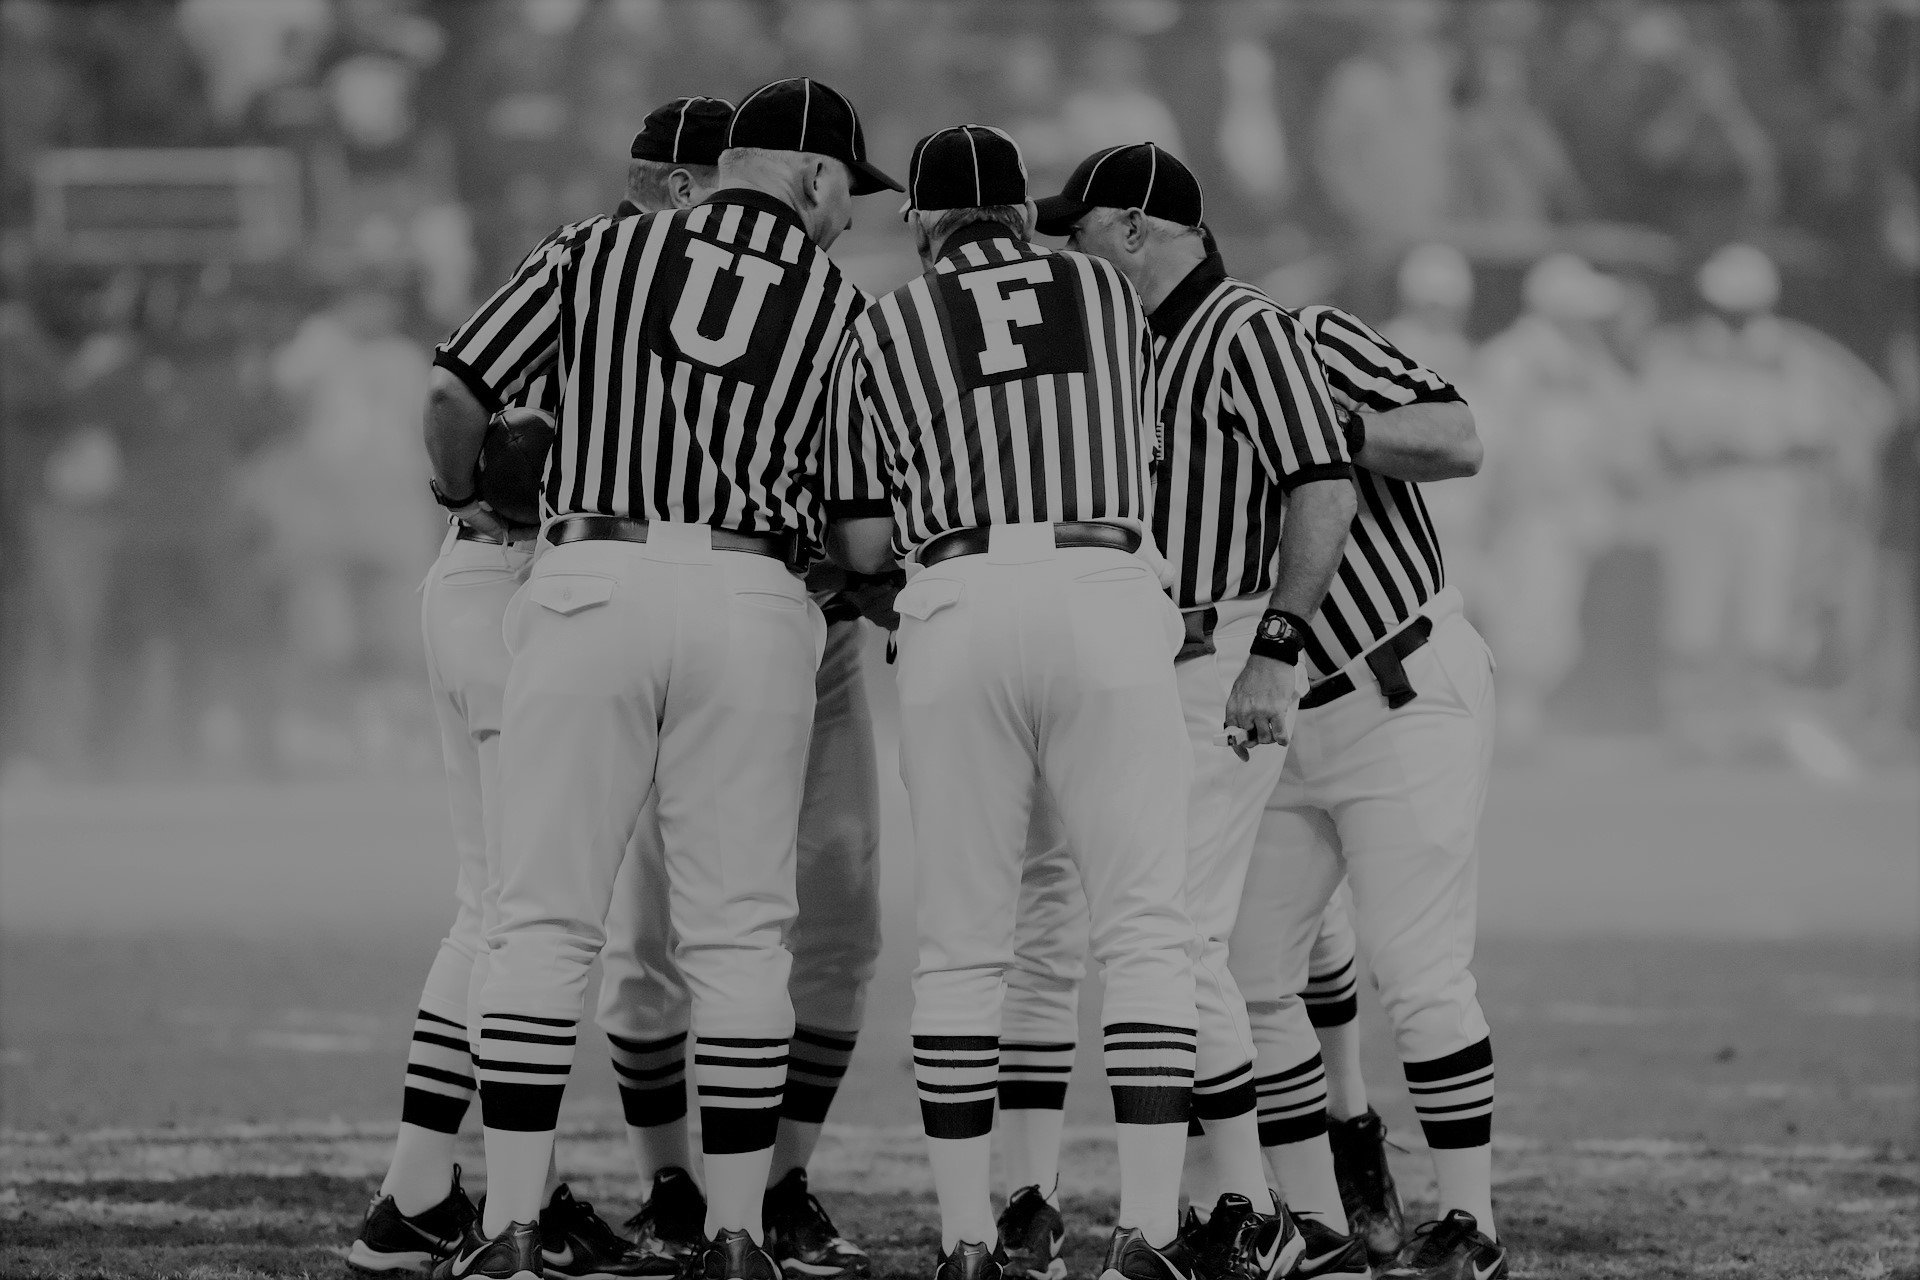 black and white image of football refs huddled together